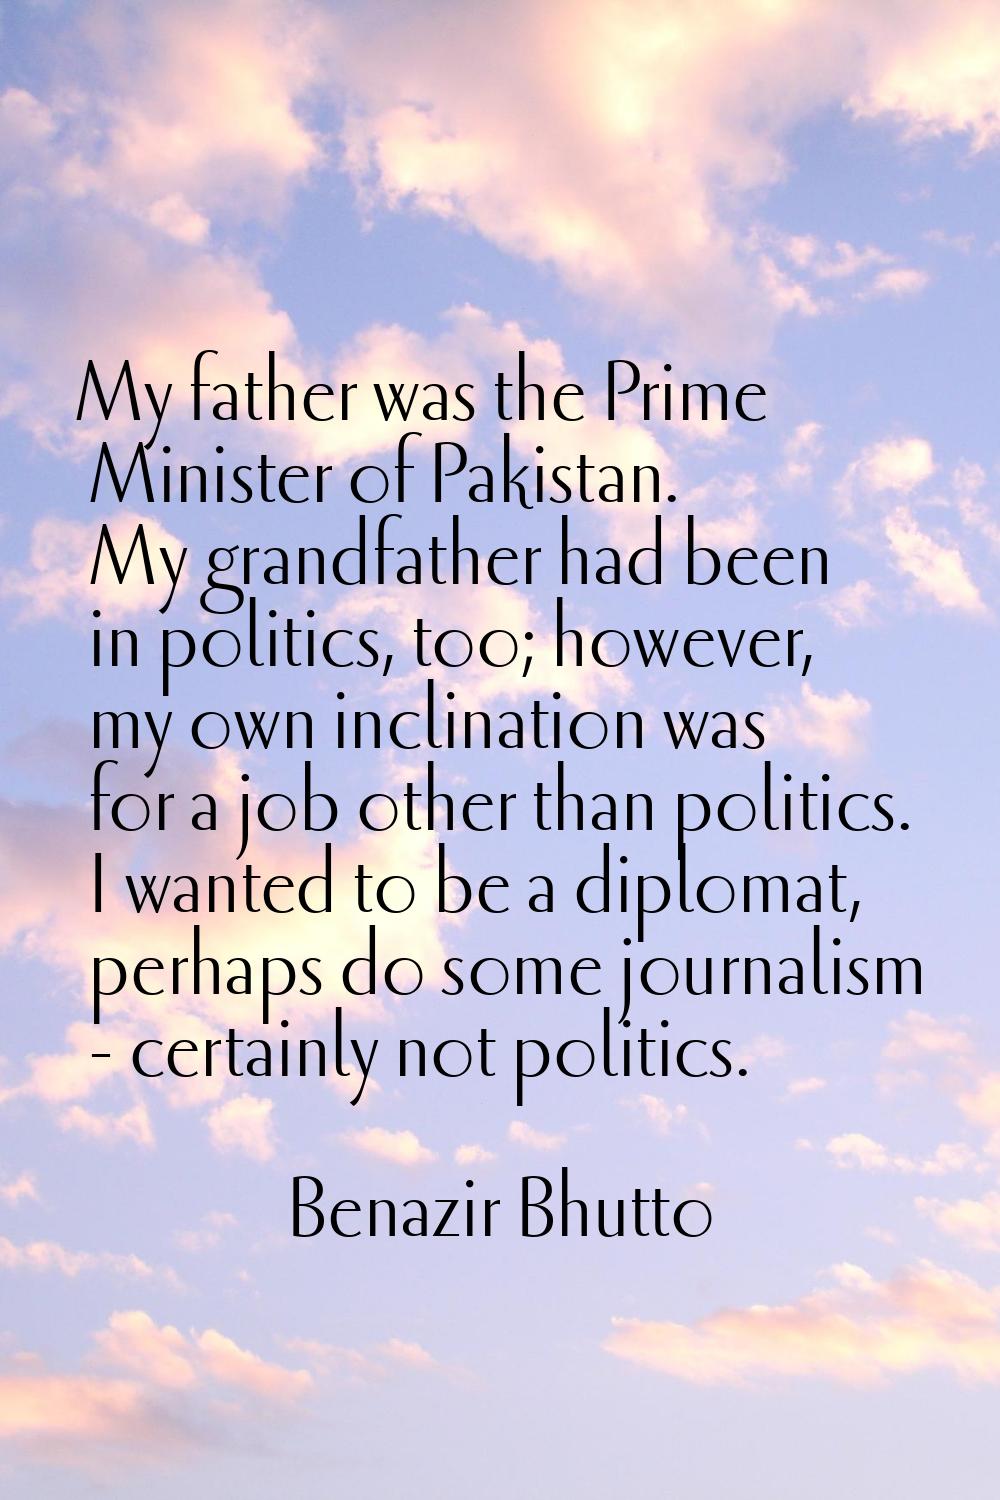 My father was the Prime Minister of Pakistan. My grandfather had been in politics, too; however, my